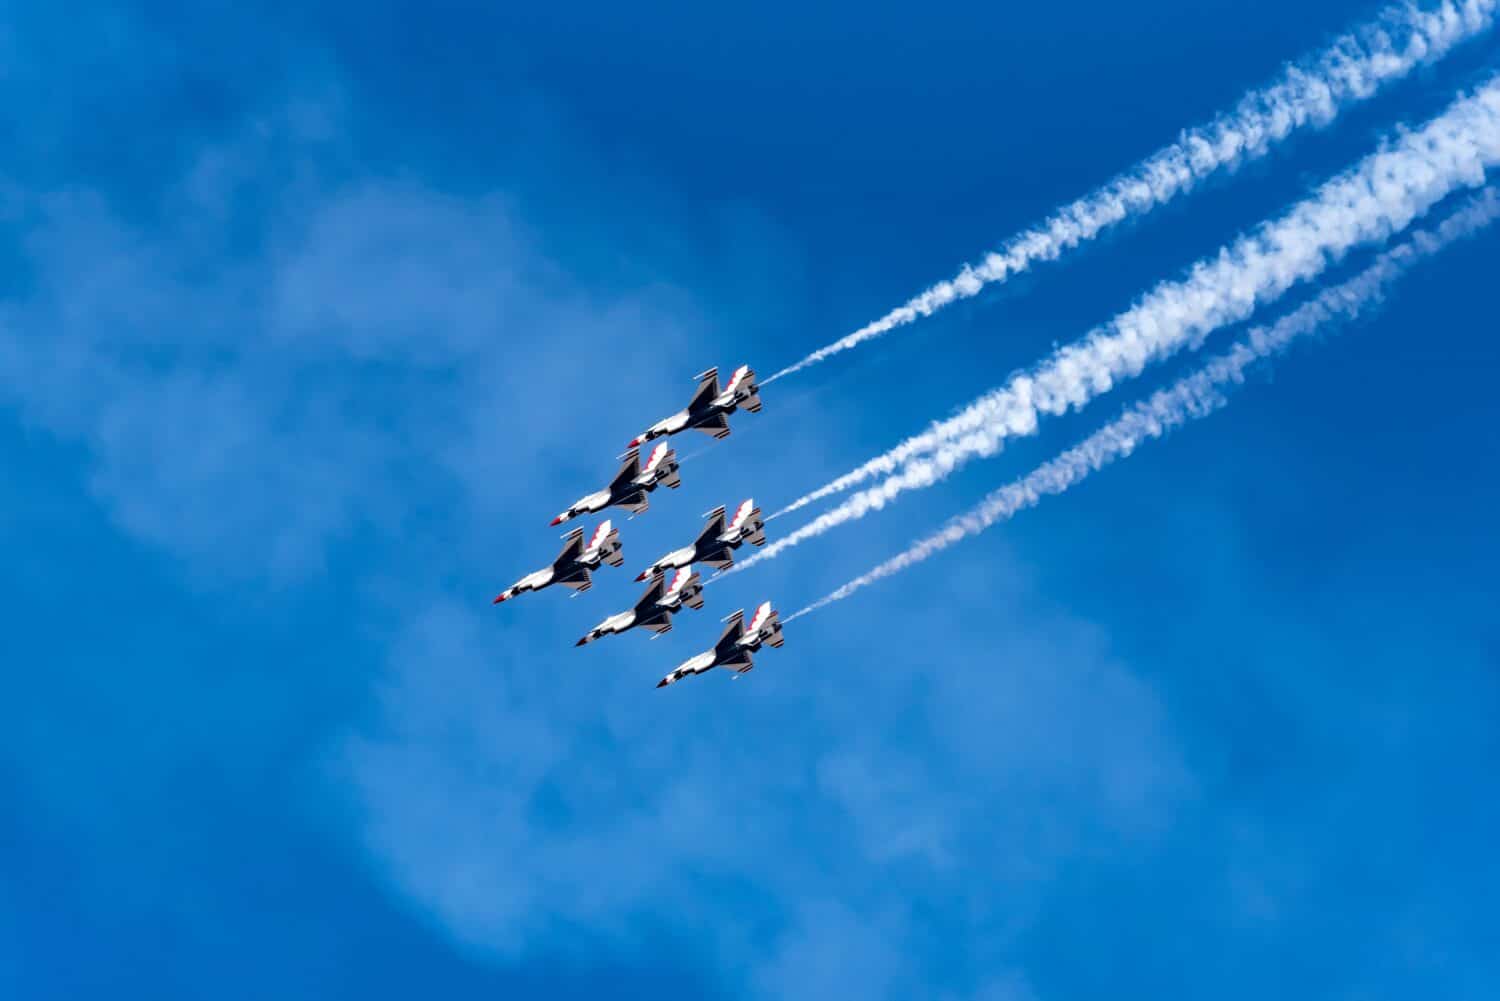 Thunderbirds in formation in the sky